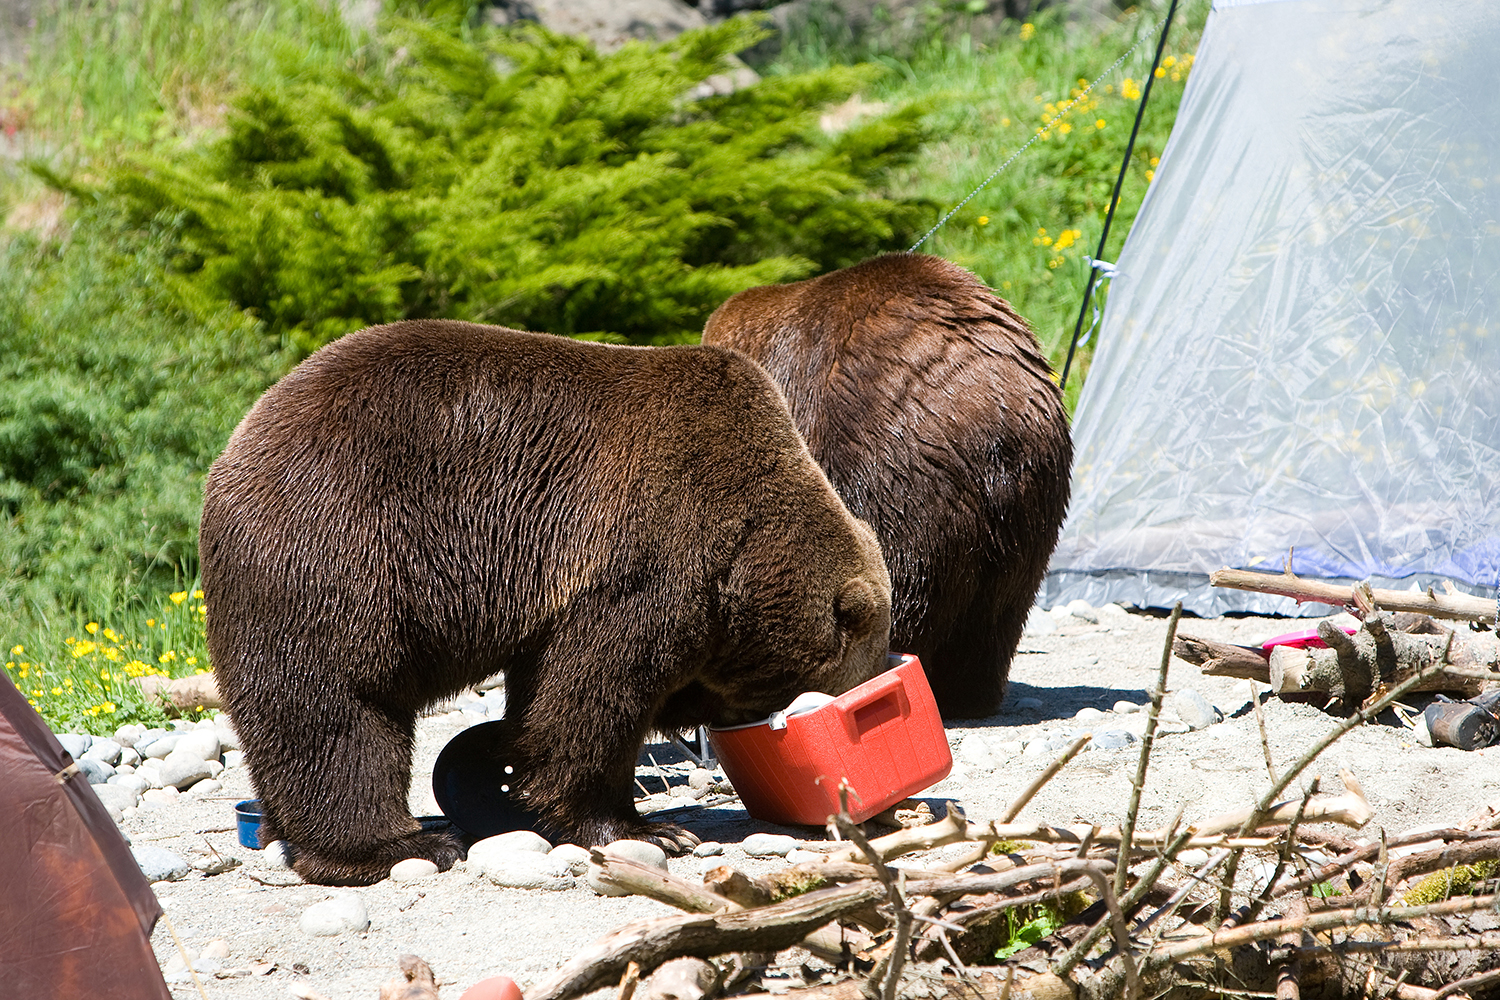 bears in campsite with cooler